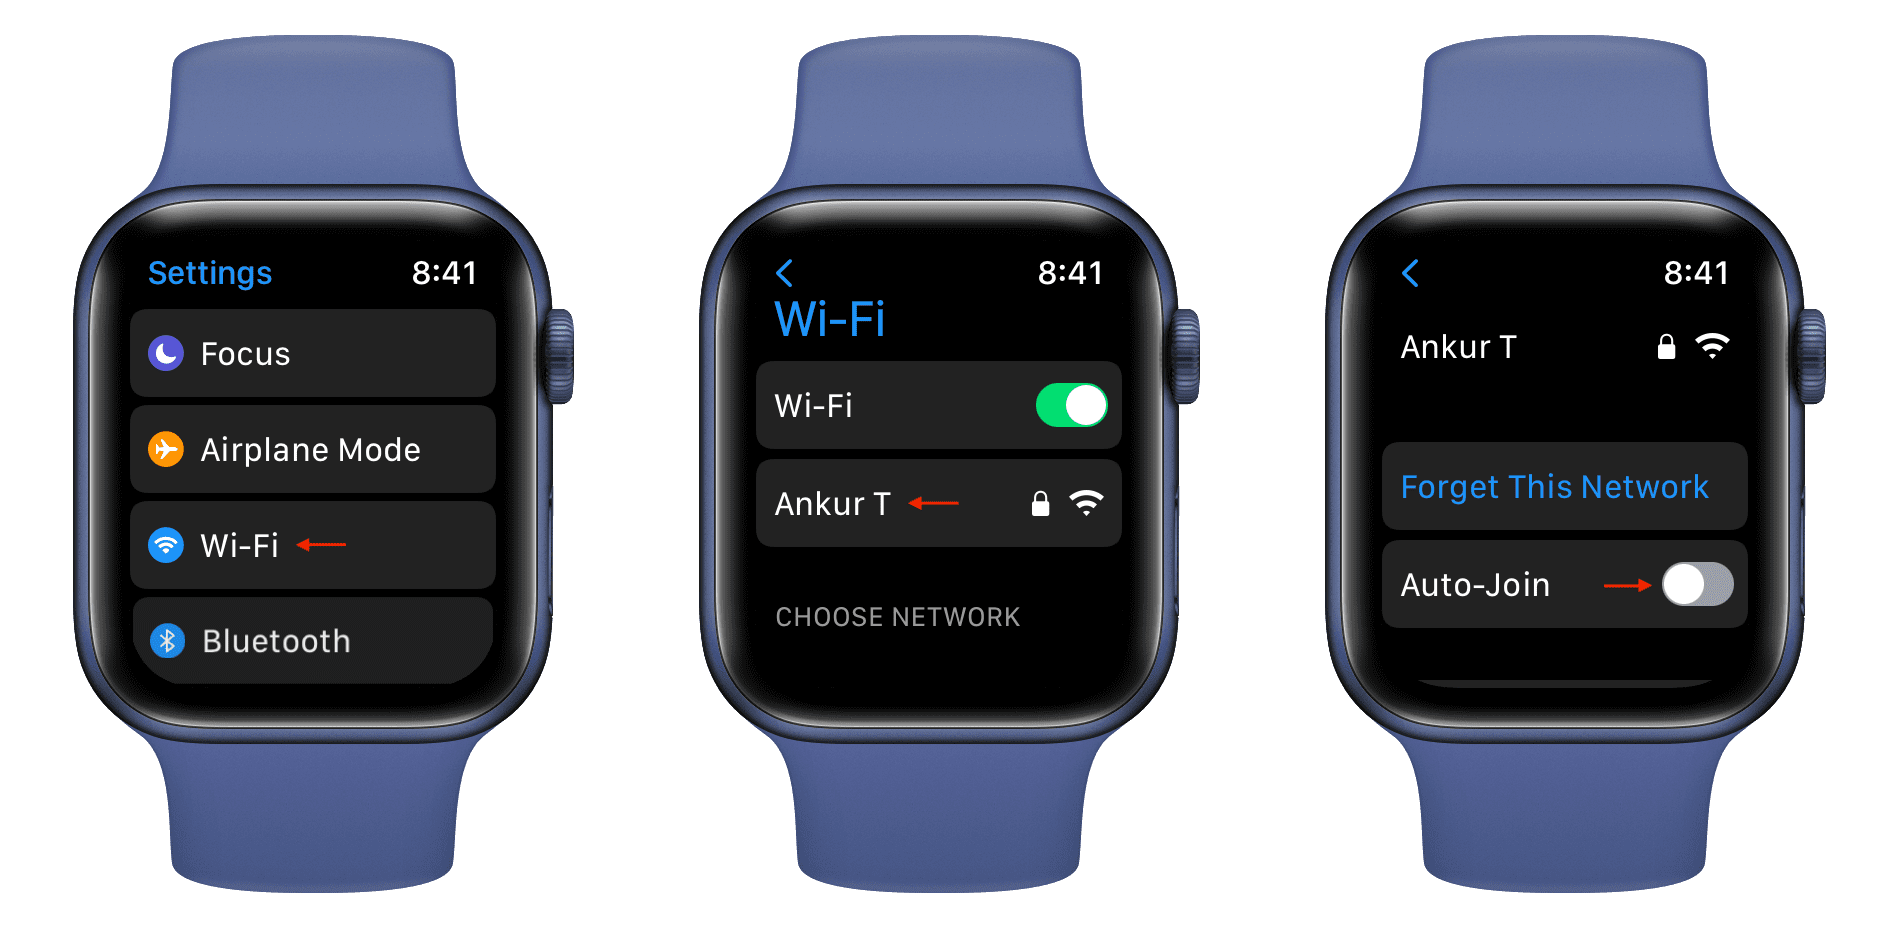 Wi-Fi Auto-Join preferences on Apple Watch